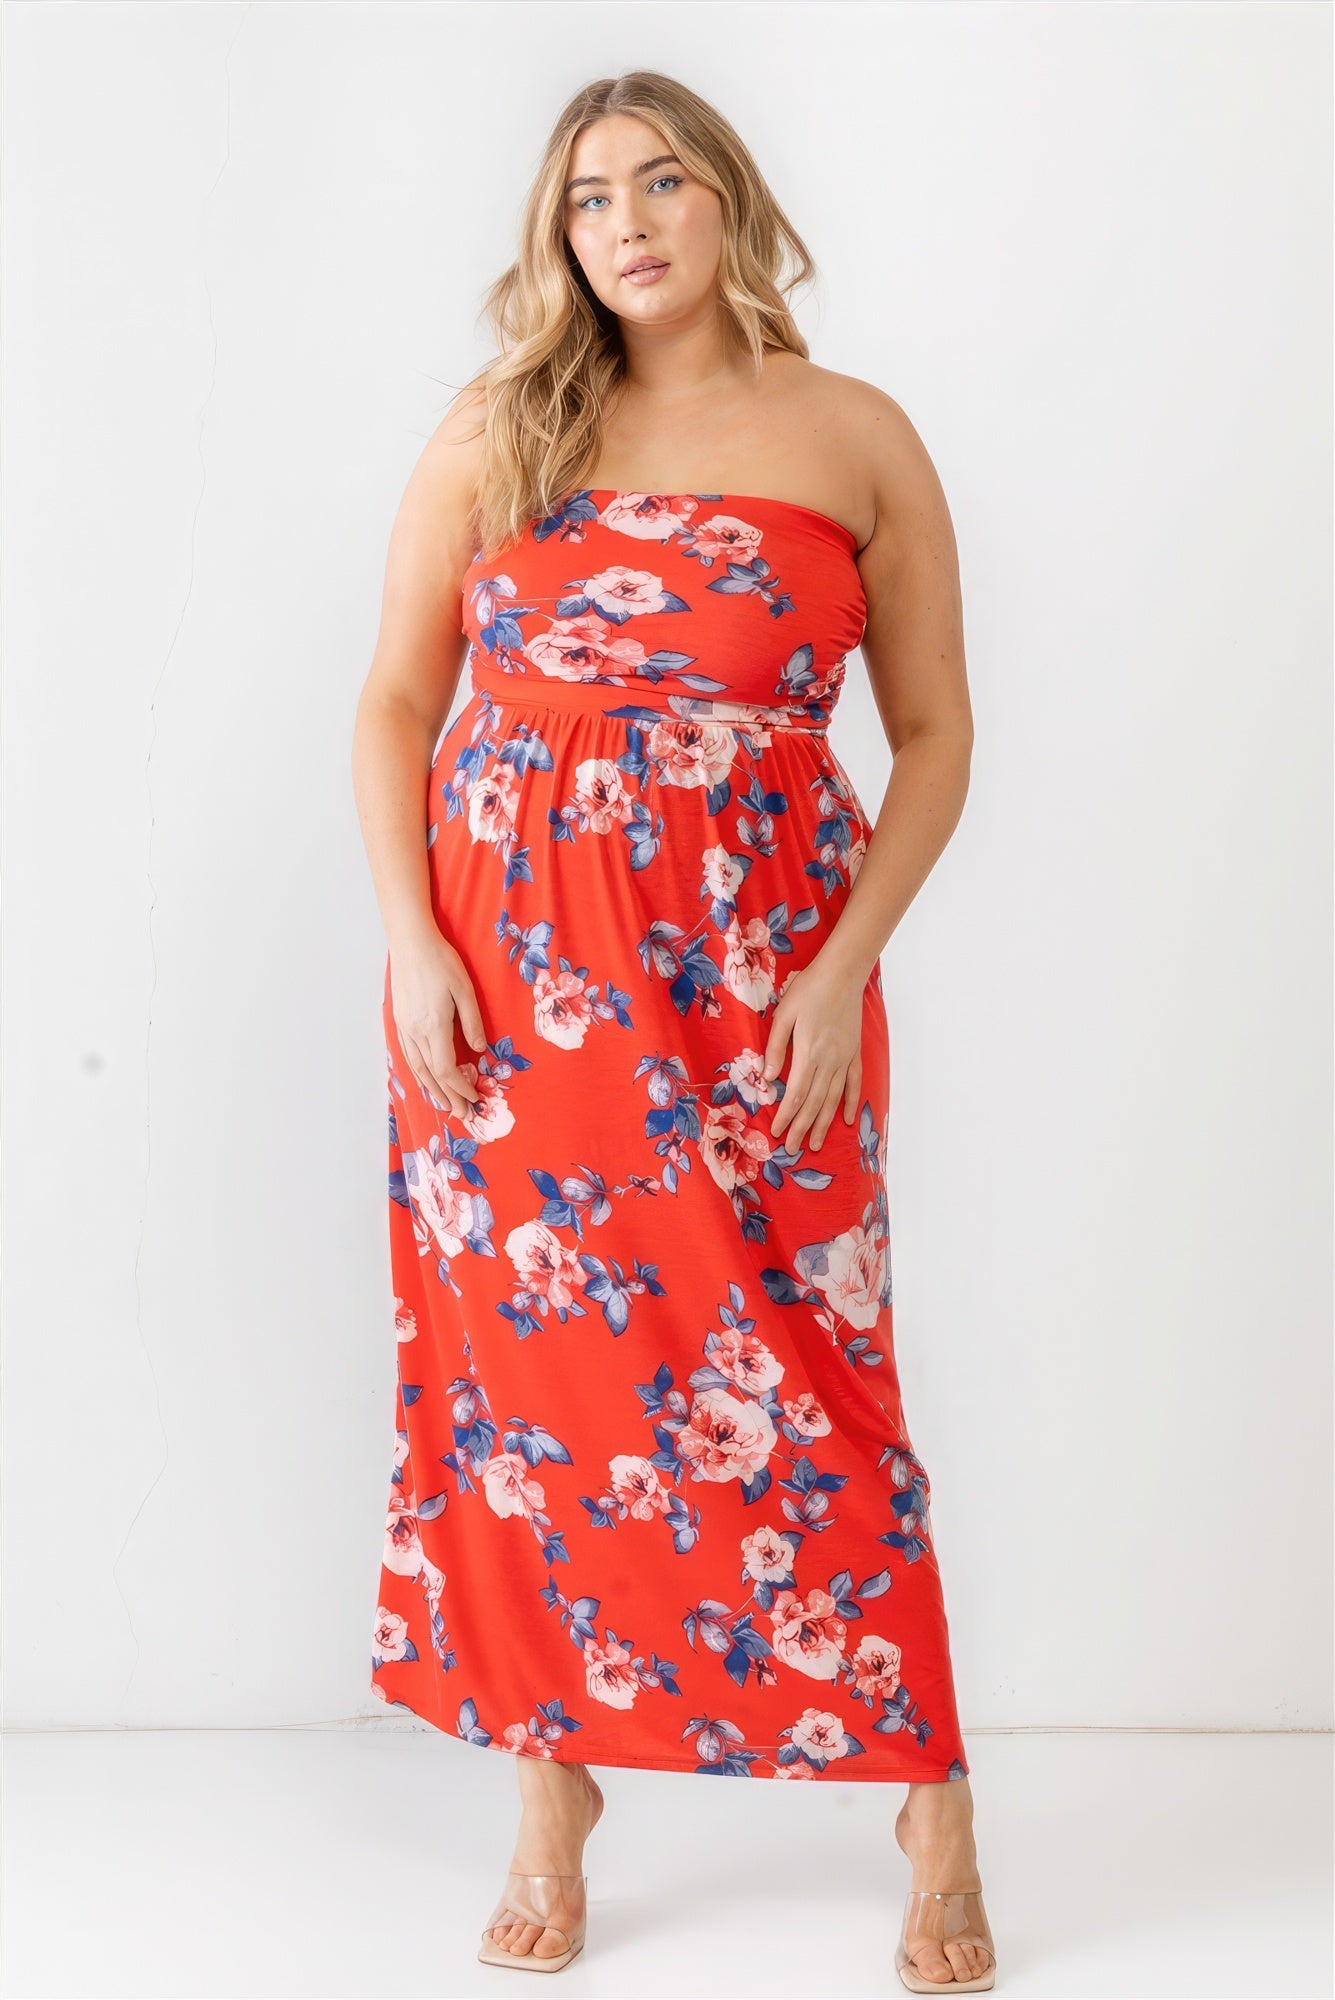 Blue Zone Planet |  Evelyn's Red Rose Print Ruched Strapless Midi Dress Blue Zone Planet